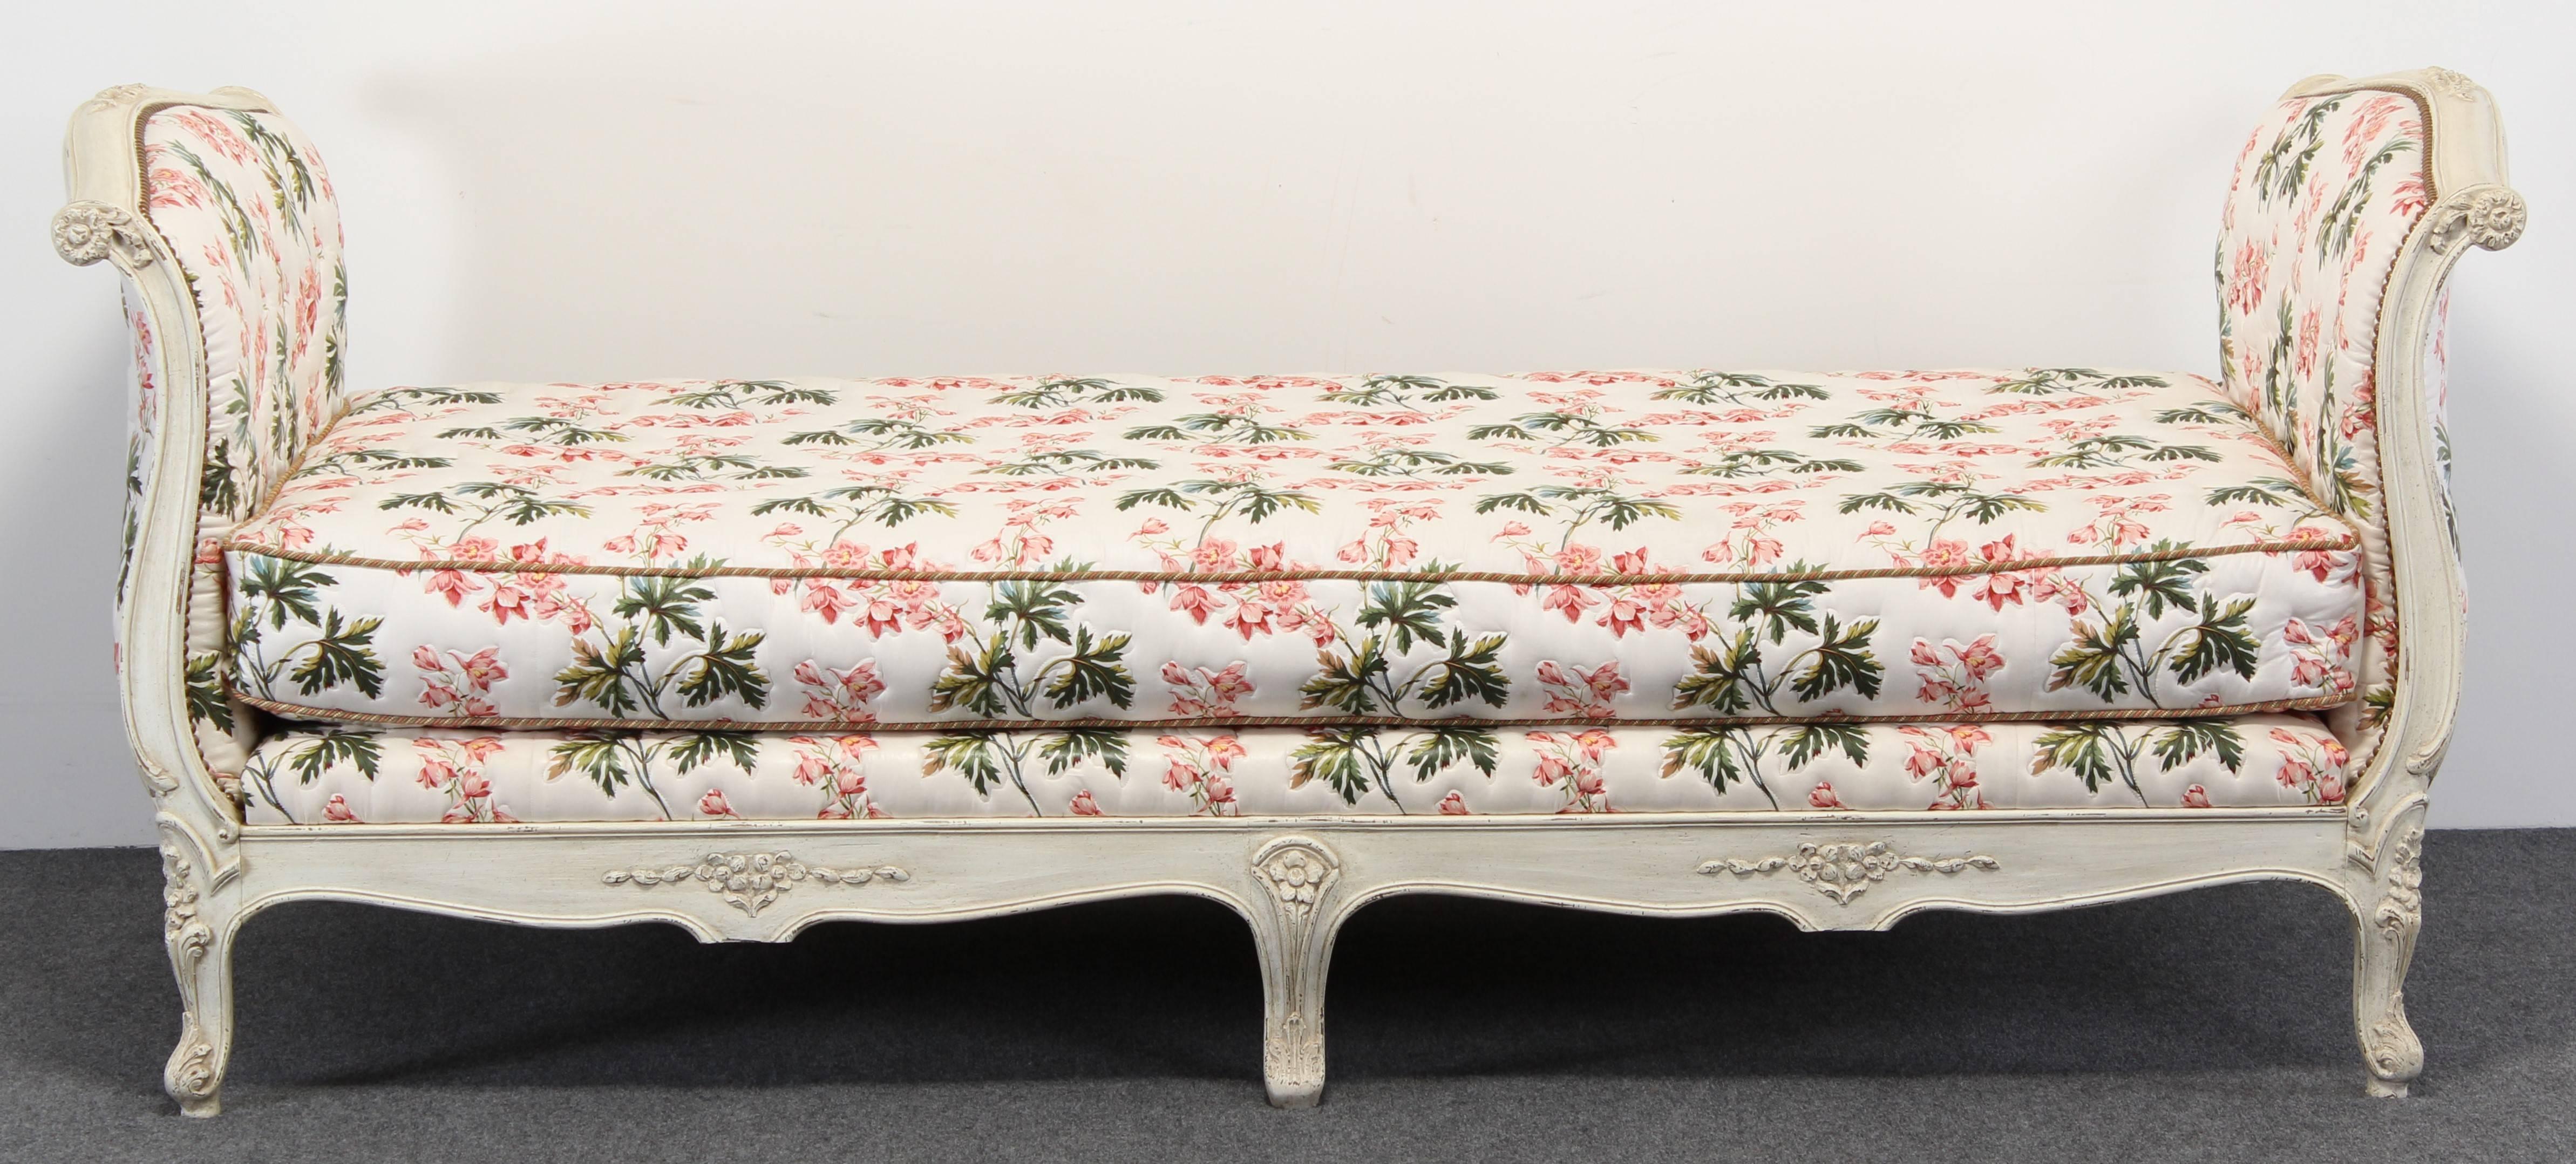 A handsome French Louis XV style carved wood daybed with original paint and Chintz floral fabric. Structurally sound. Fabric is in good condition.
 